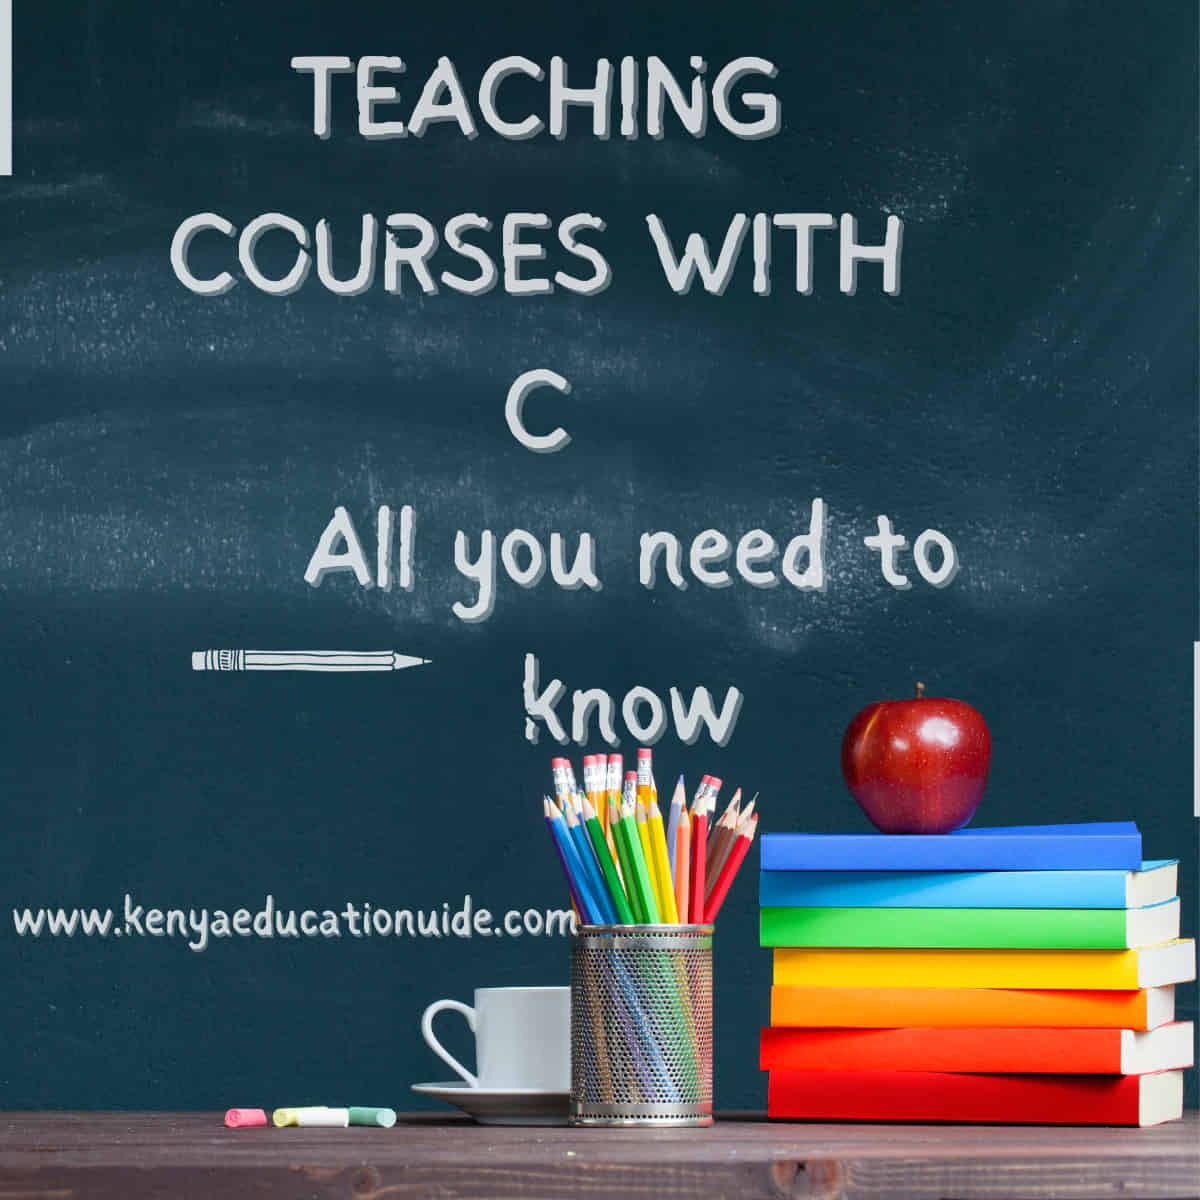 Teaching courses with C